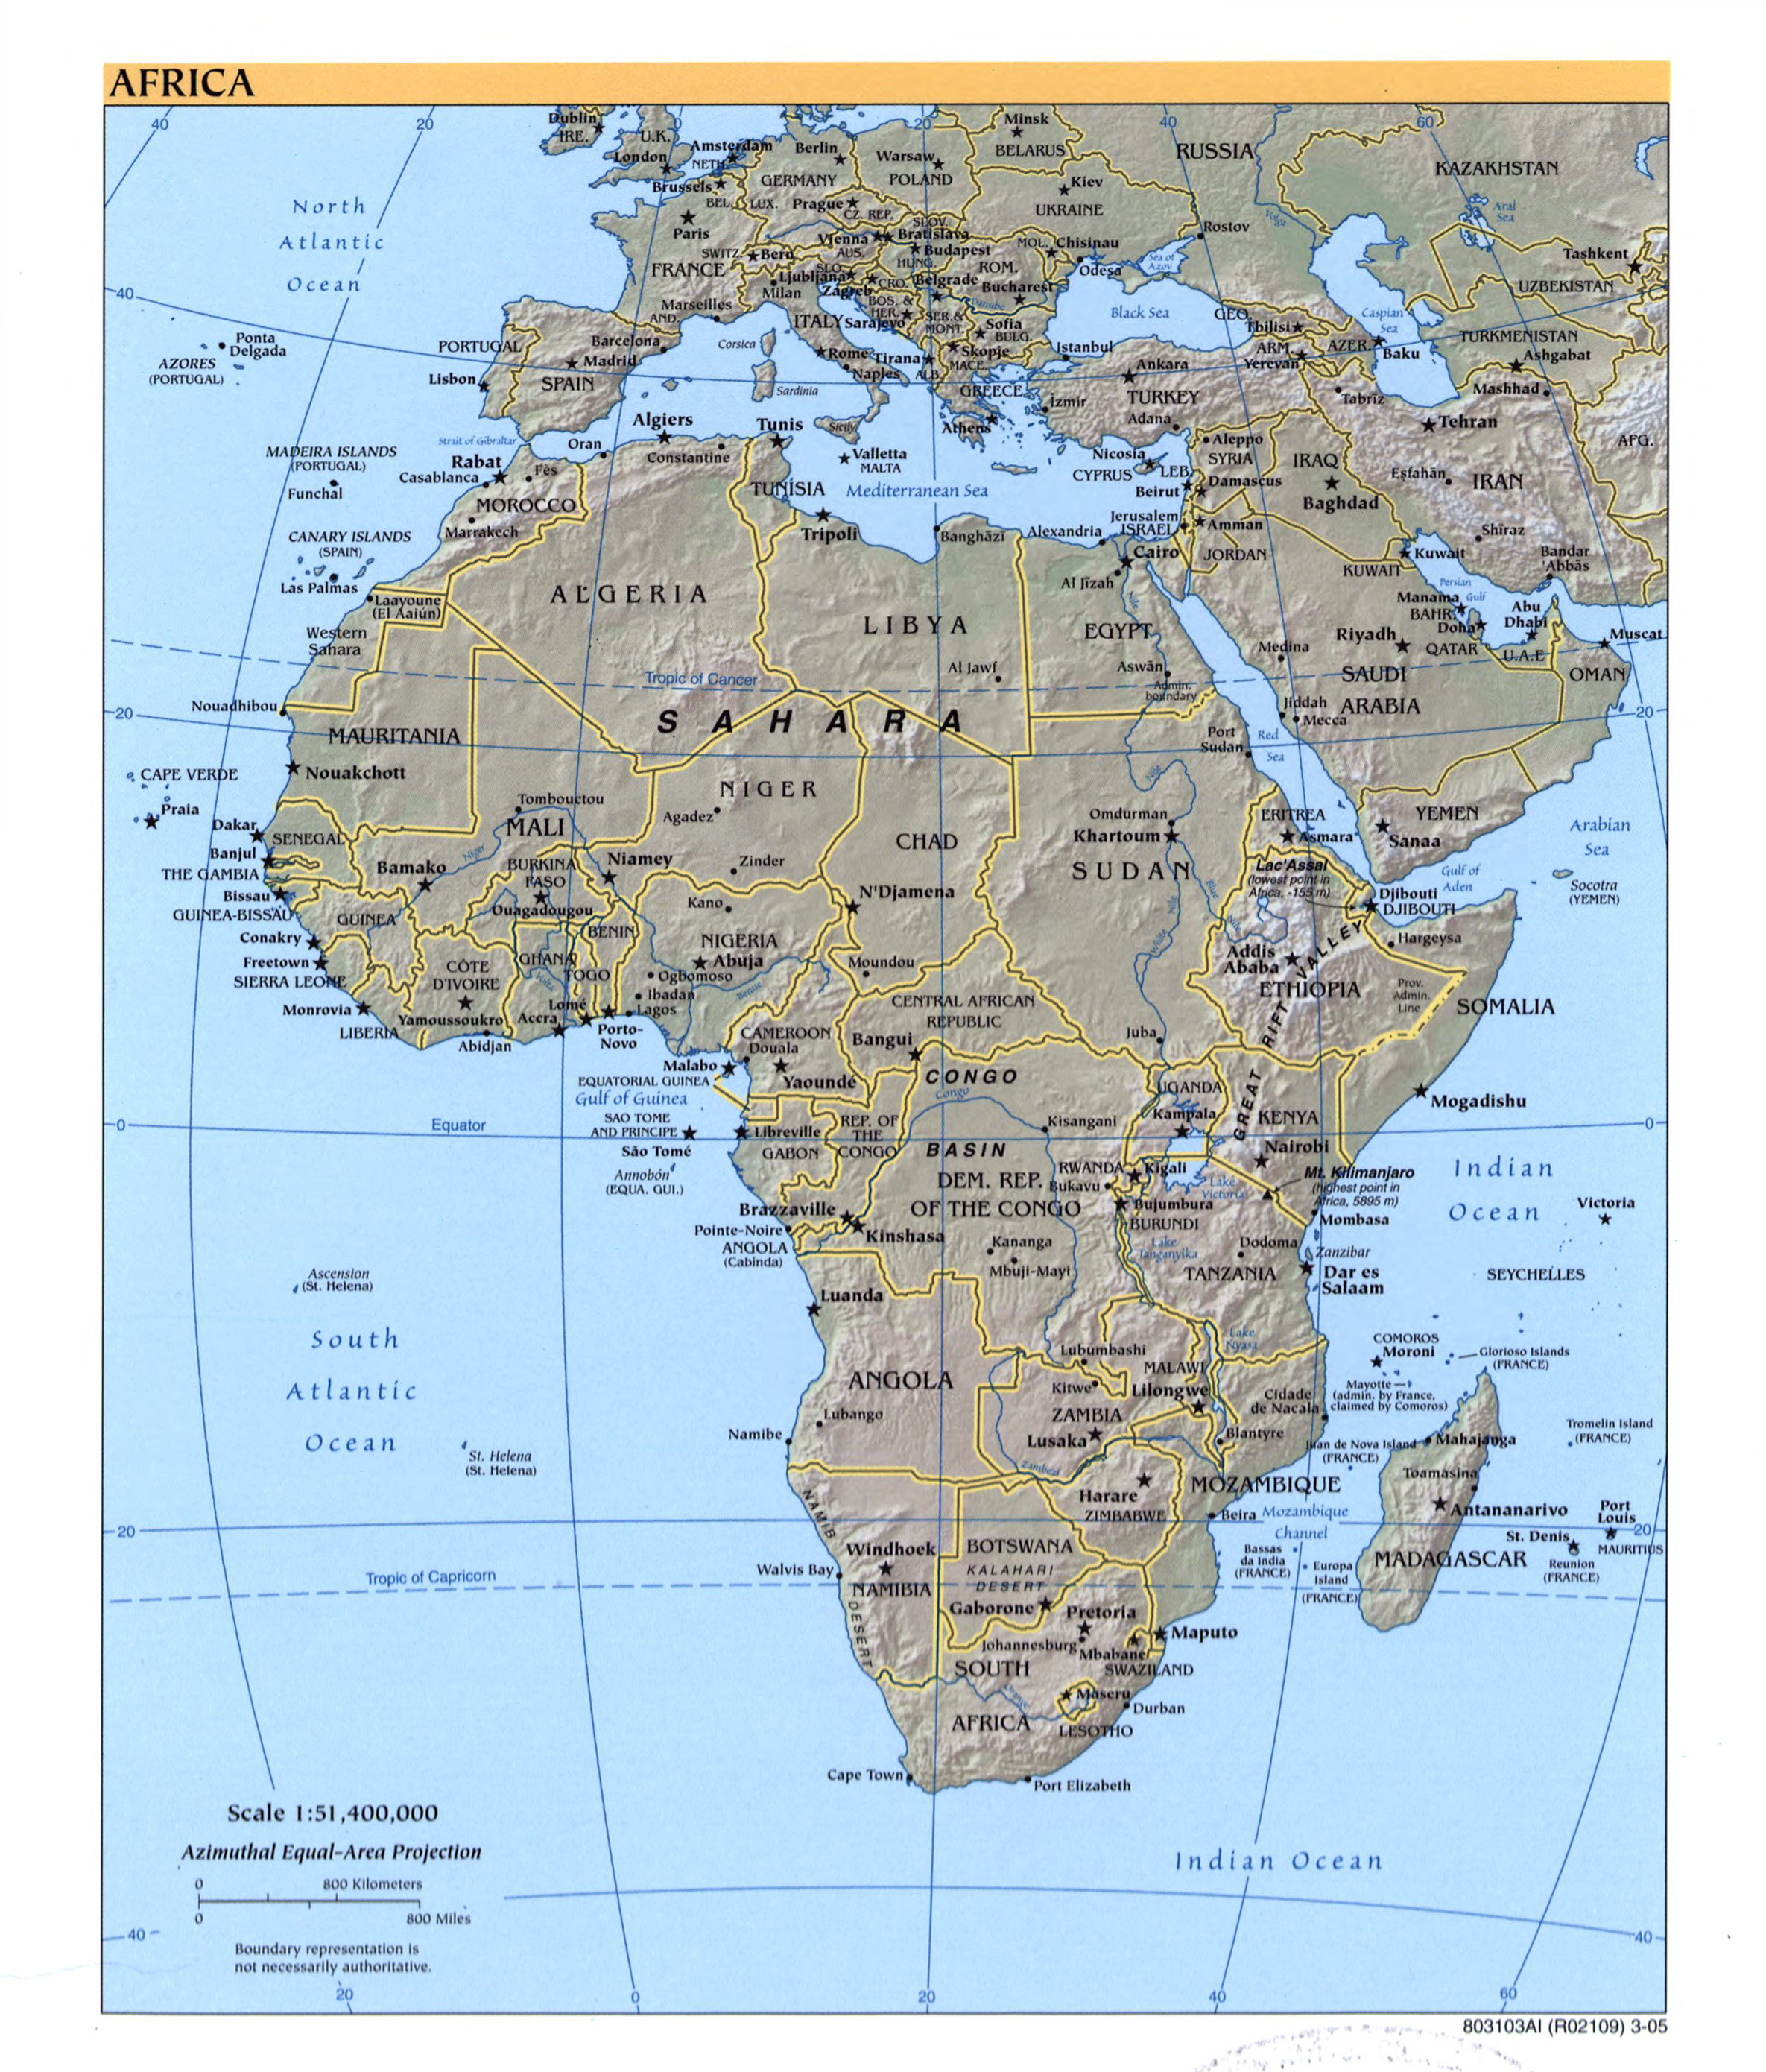 Map Of Africa With Names Large detailed political map of Africa with relief, marks of 